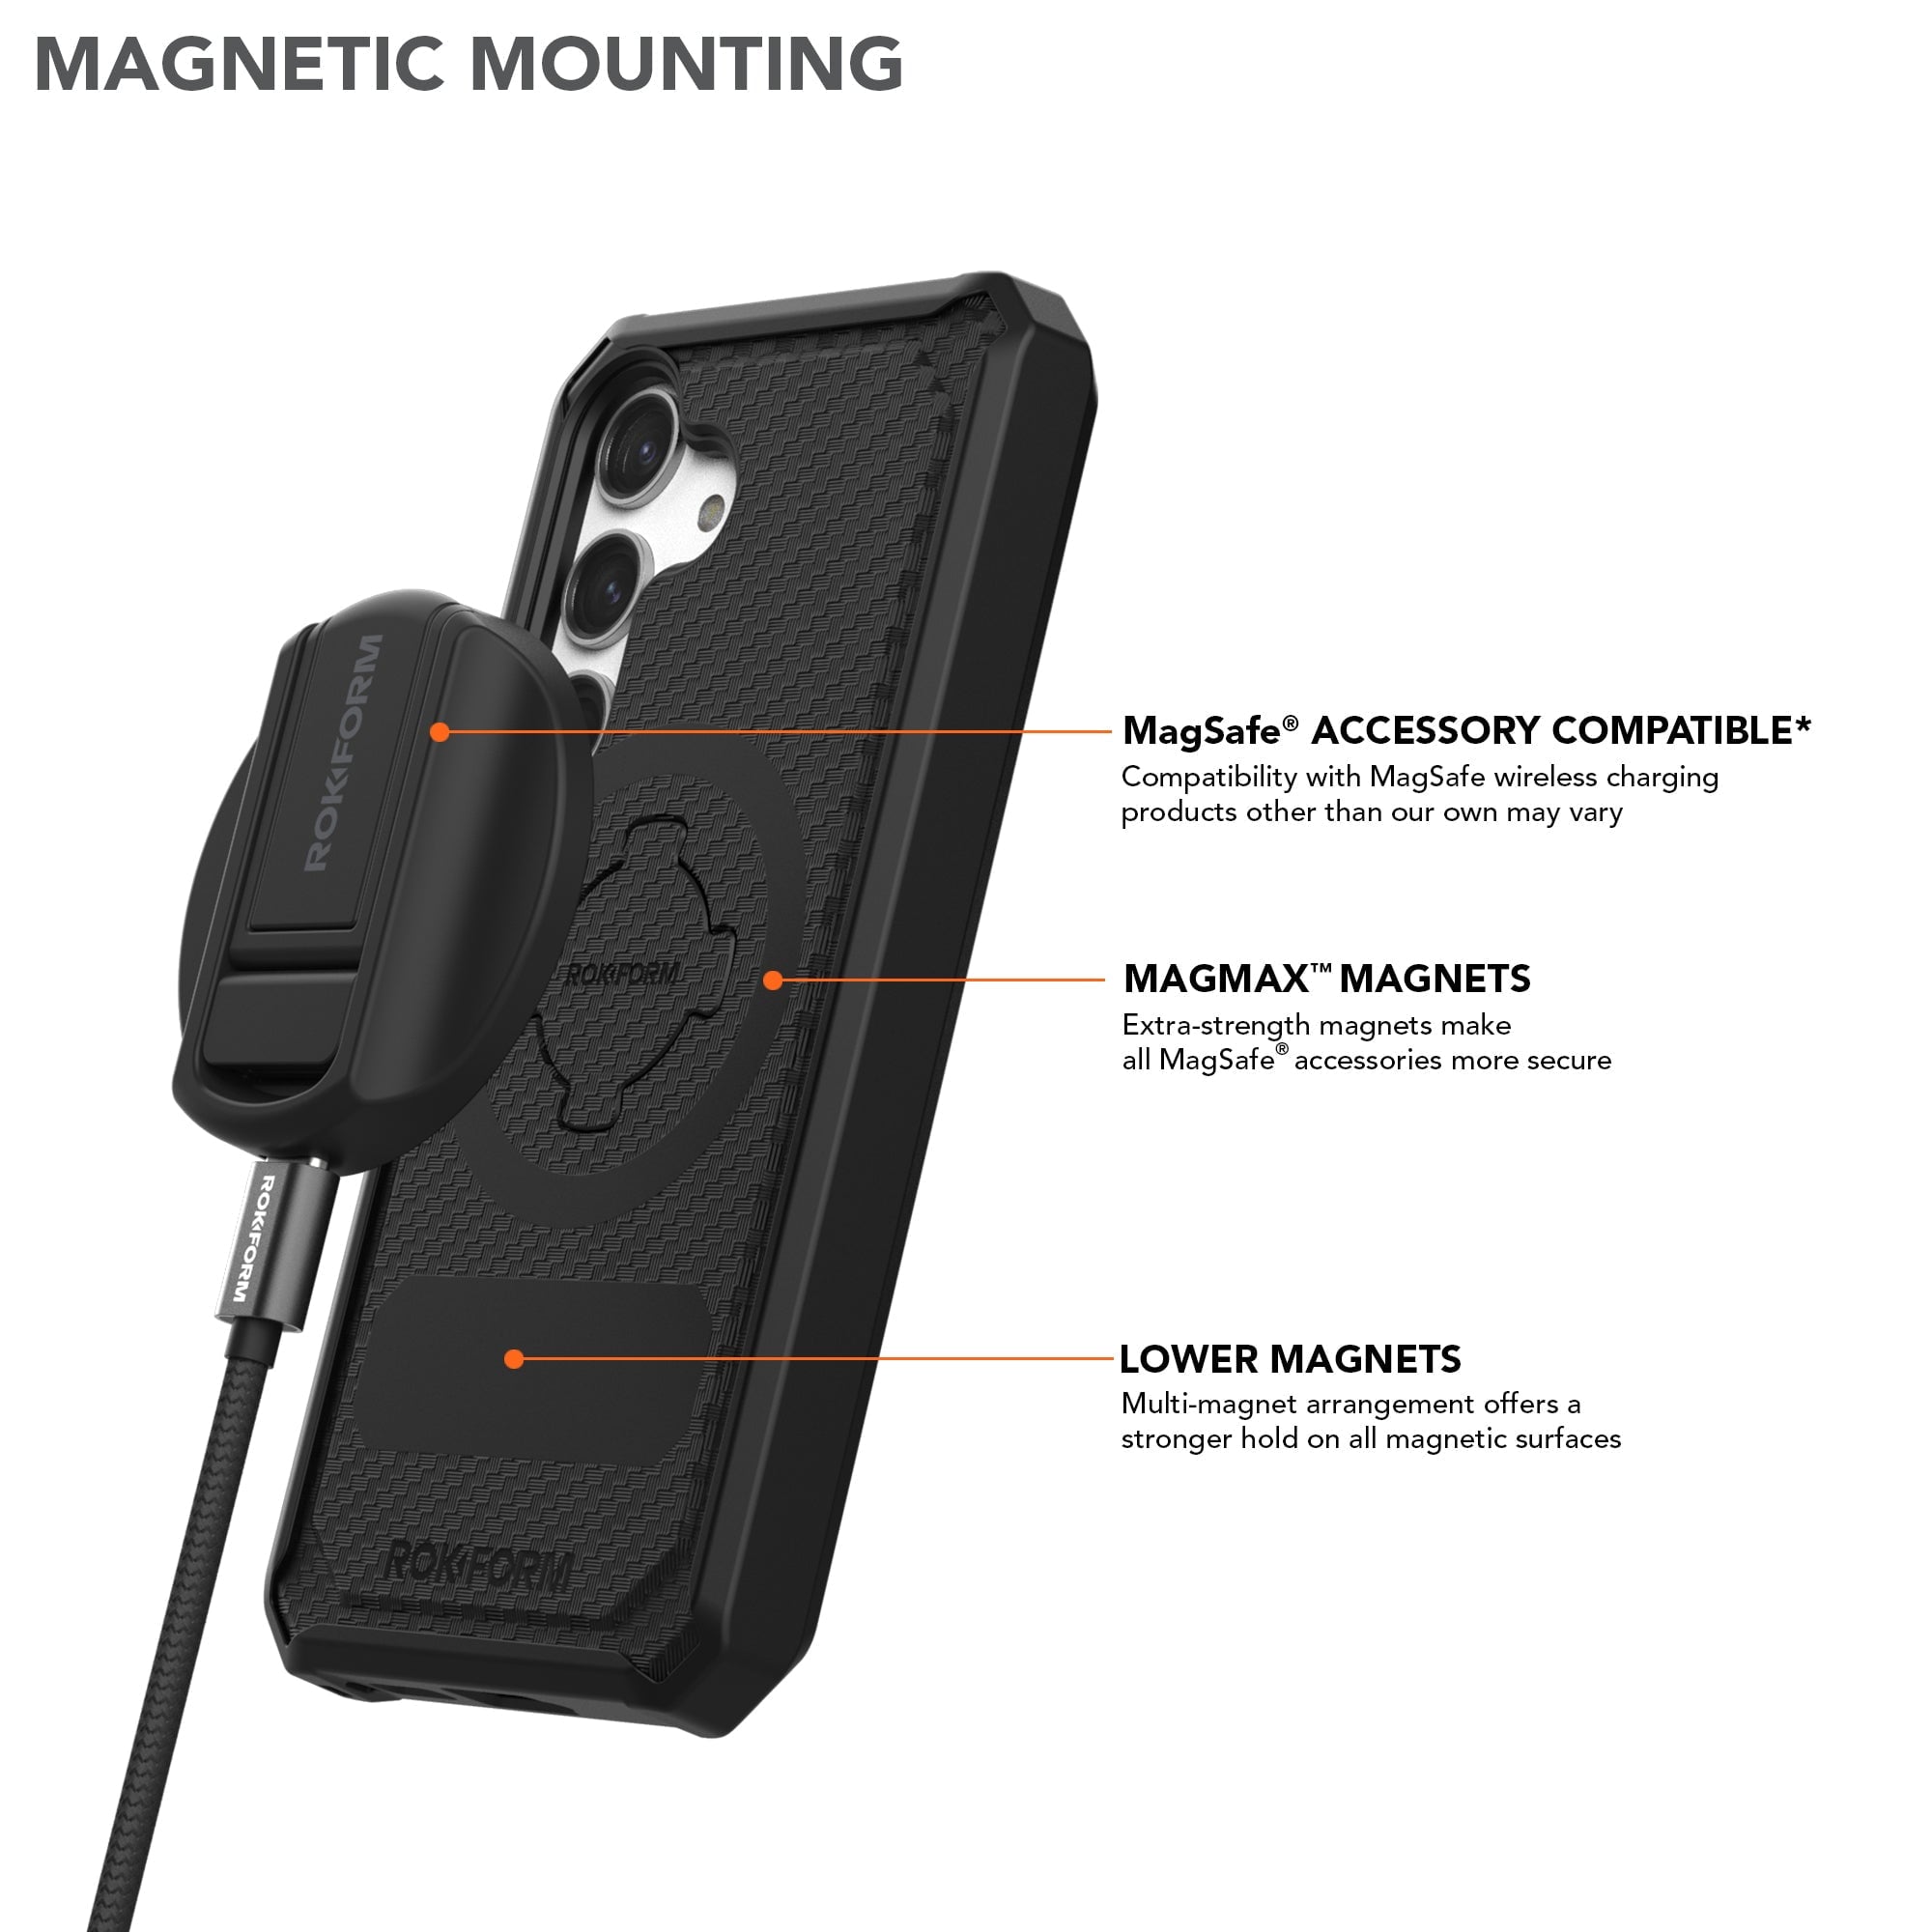 Samsung Galaxy S24 Magnetic Mounting